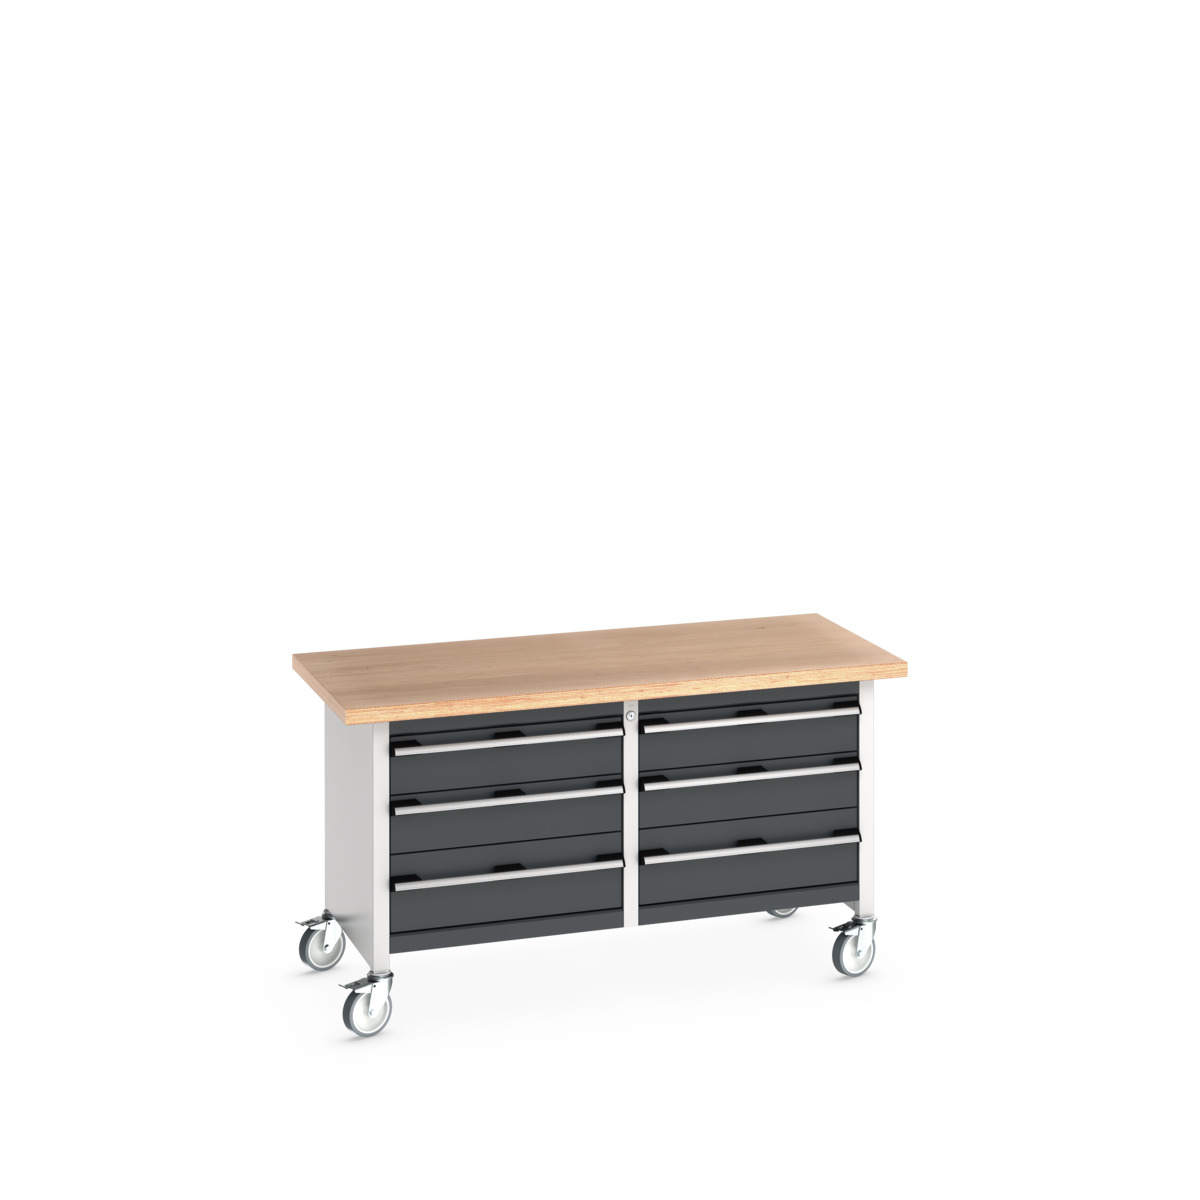 41002106.19V - cubio mobile storage bench (mpx)